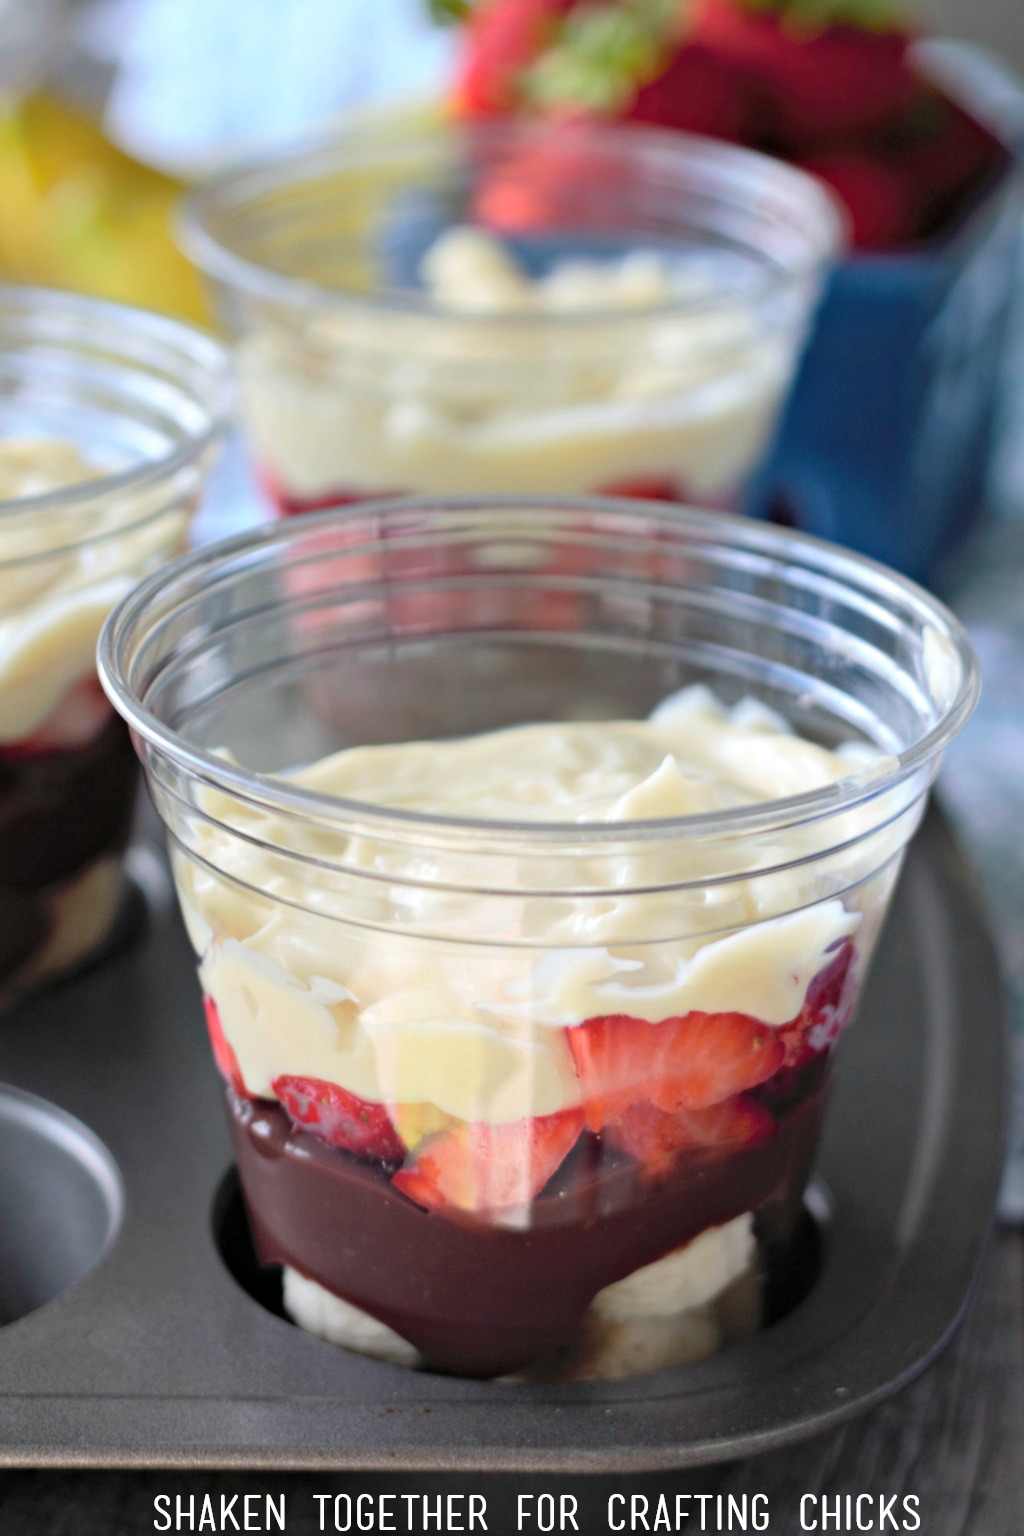 Banana Split Pudding Cups have delicious layers of fruit, pudding, whipped topping an of course - sprinkles!